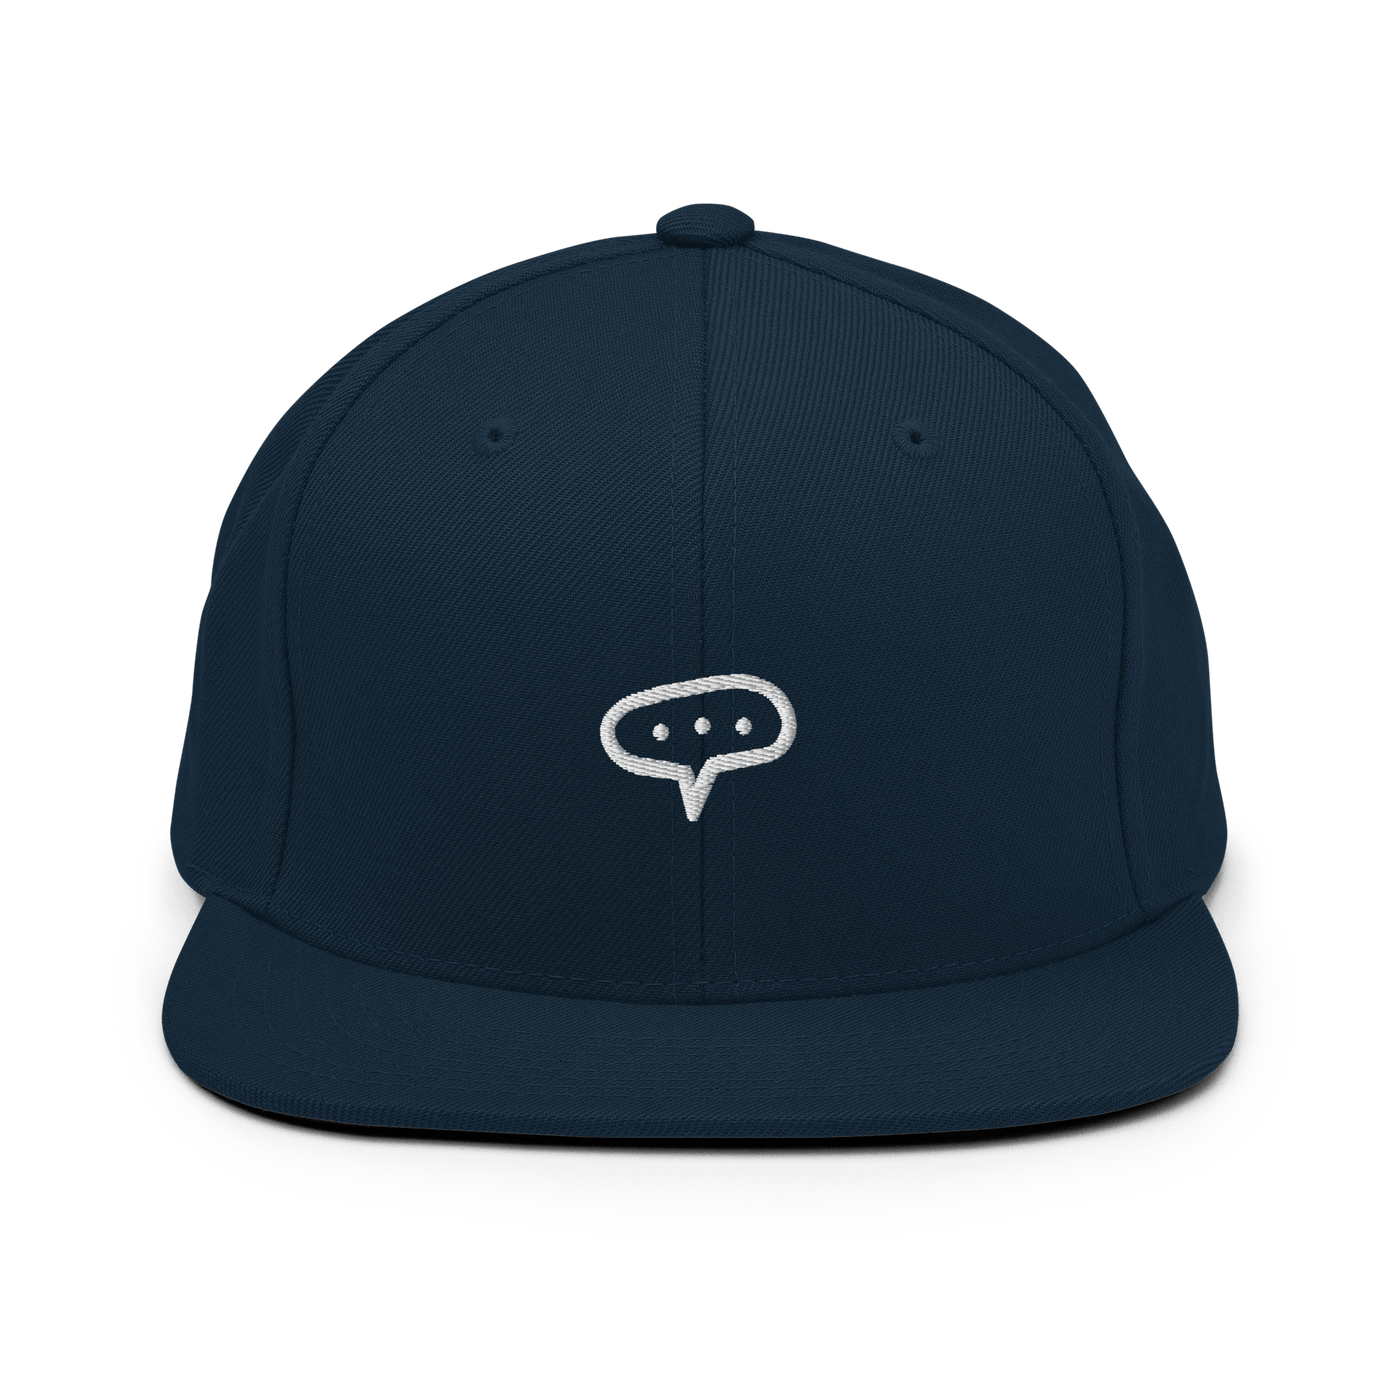 Thinking Snapback Hat - Spruce - - Just Another Cap Store